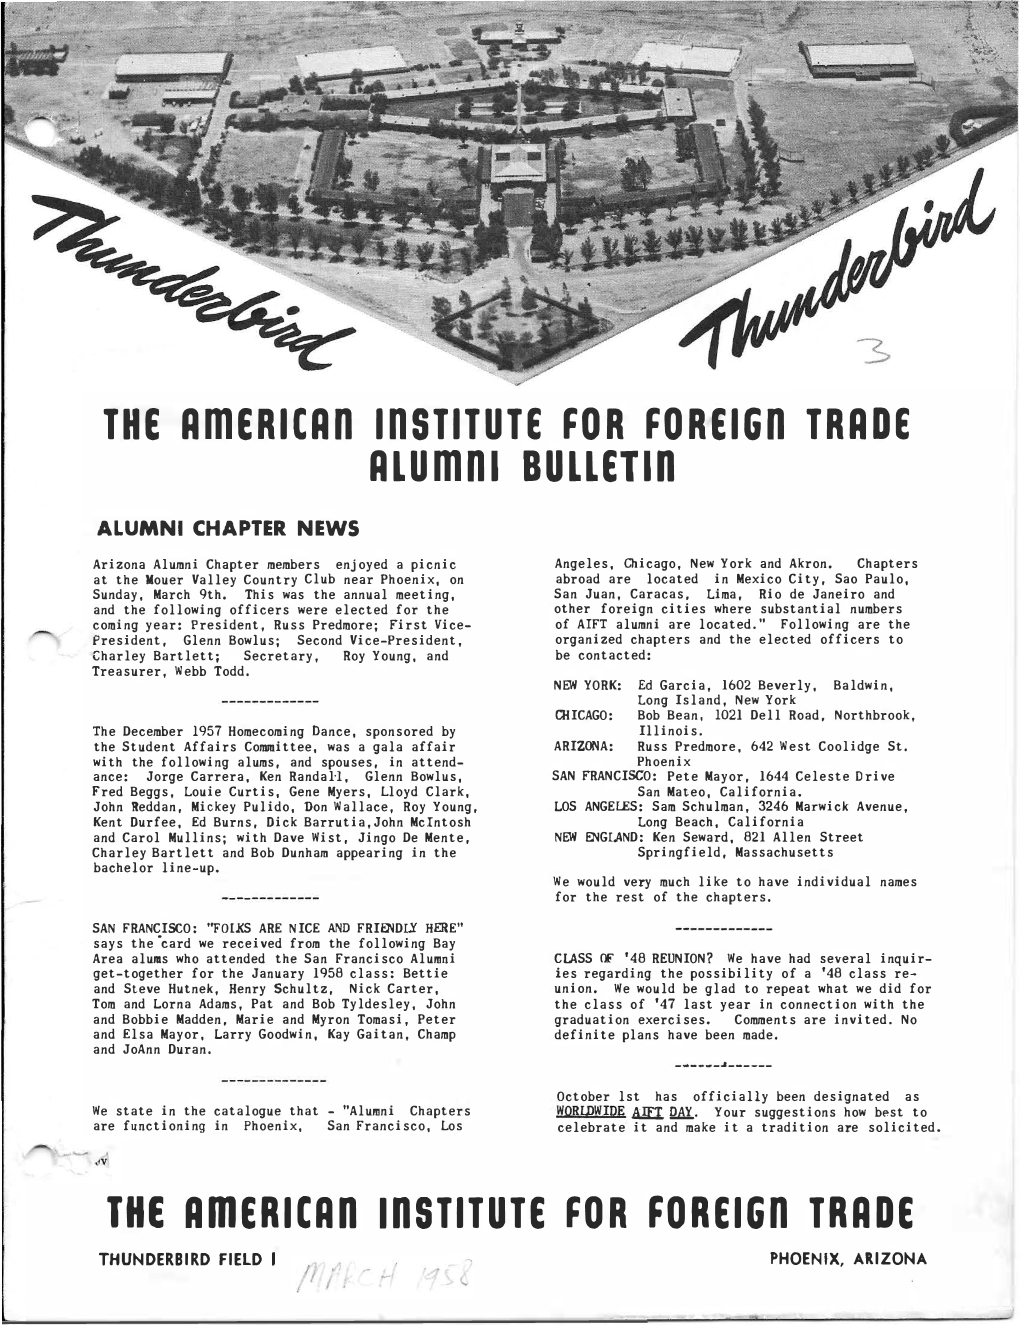 THE American IDSTITUTE for Foreign TRADE Alumni Bulletin